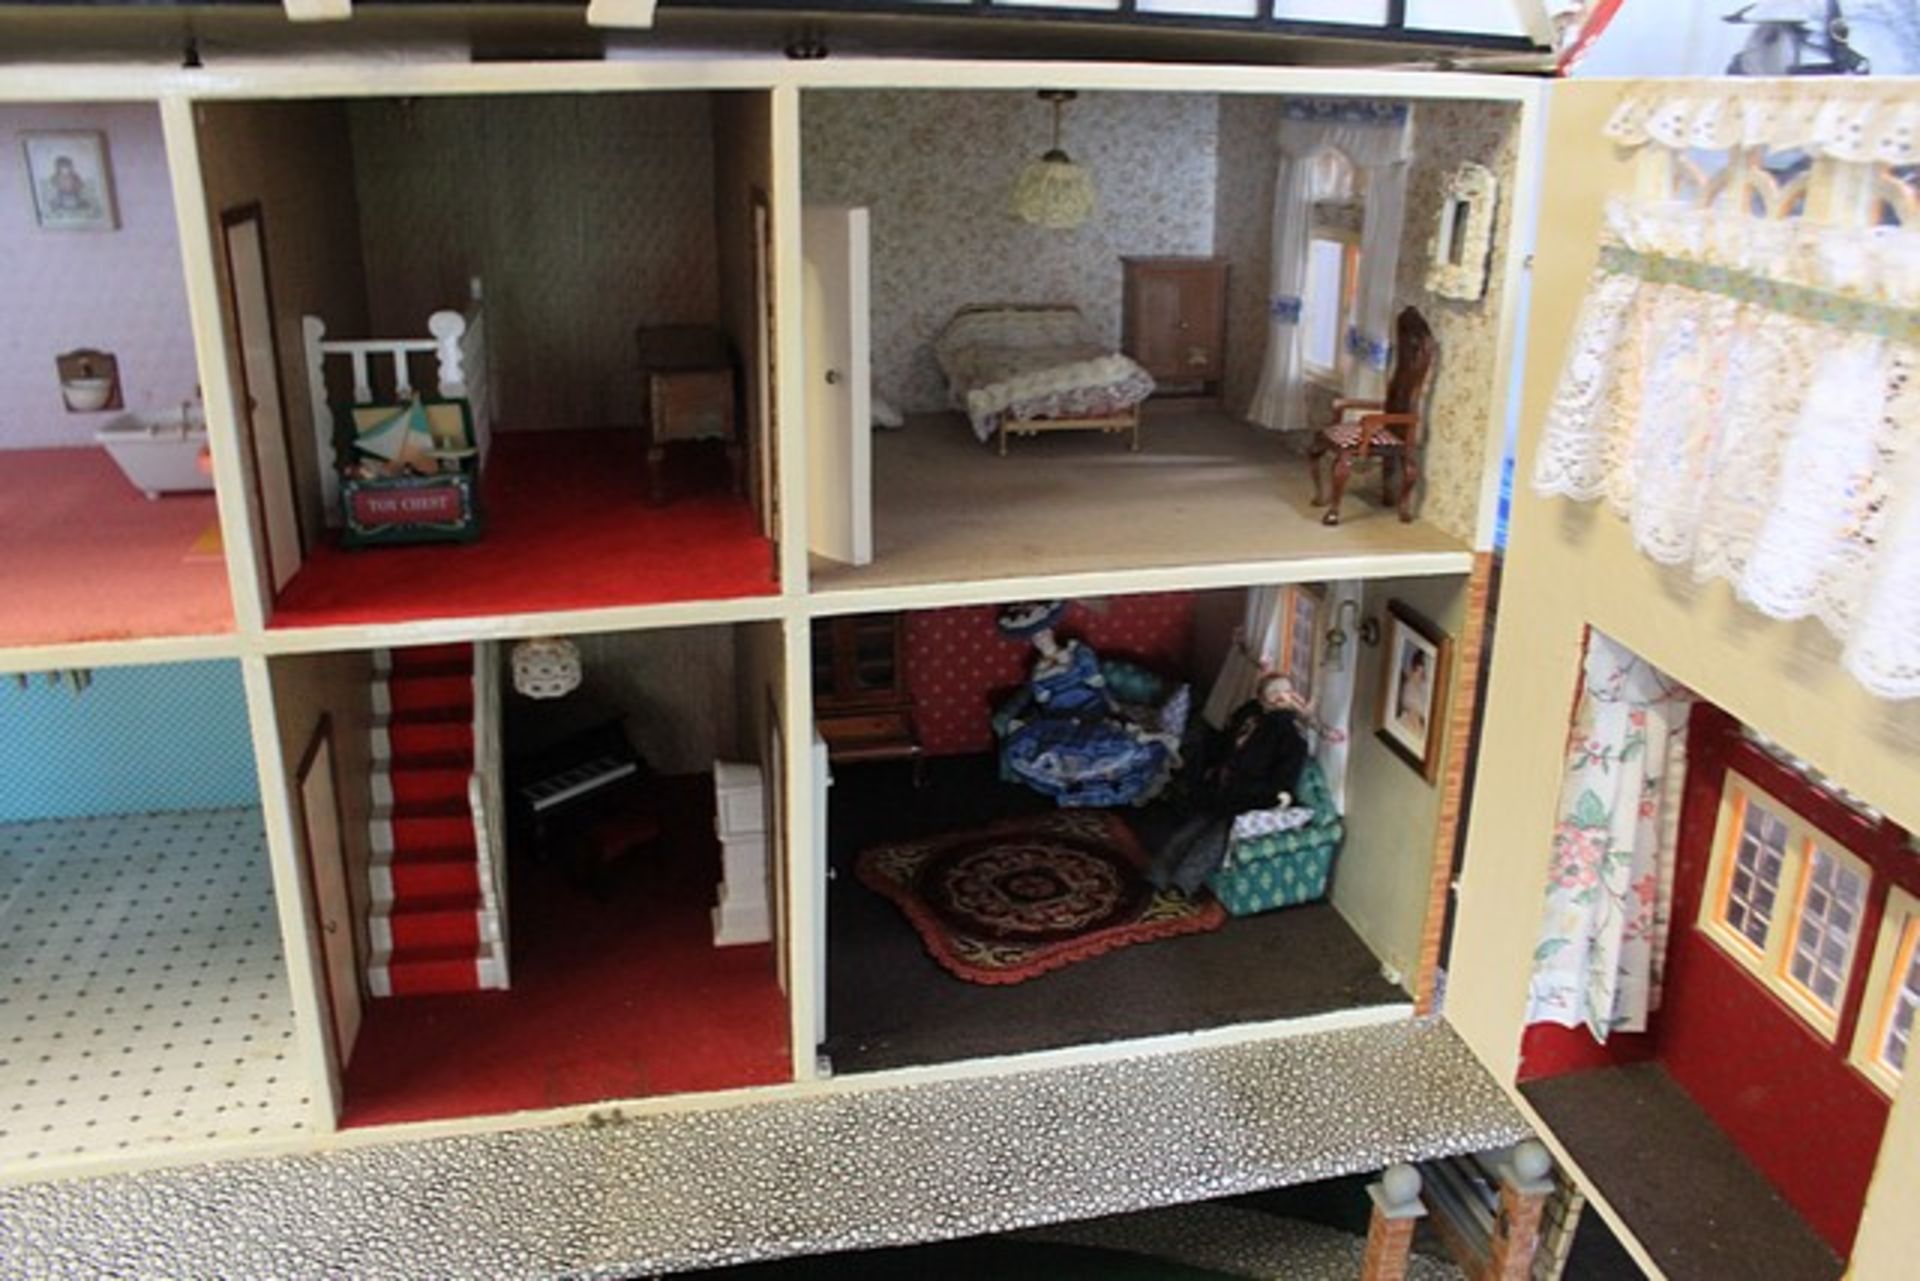 Stunning Dolls House With Pull Out Garden Area This Comes With Lots Of Furniture Including Bed, - Image 4 of 9